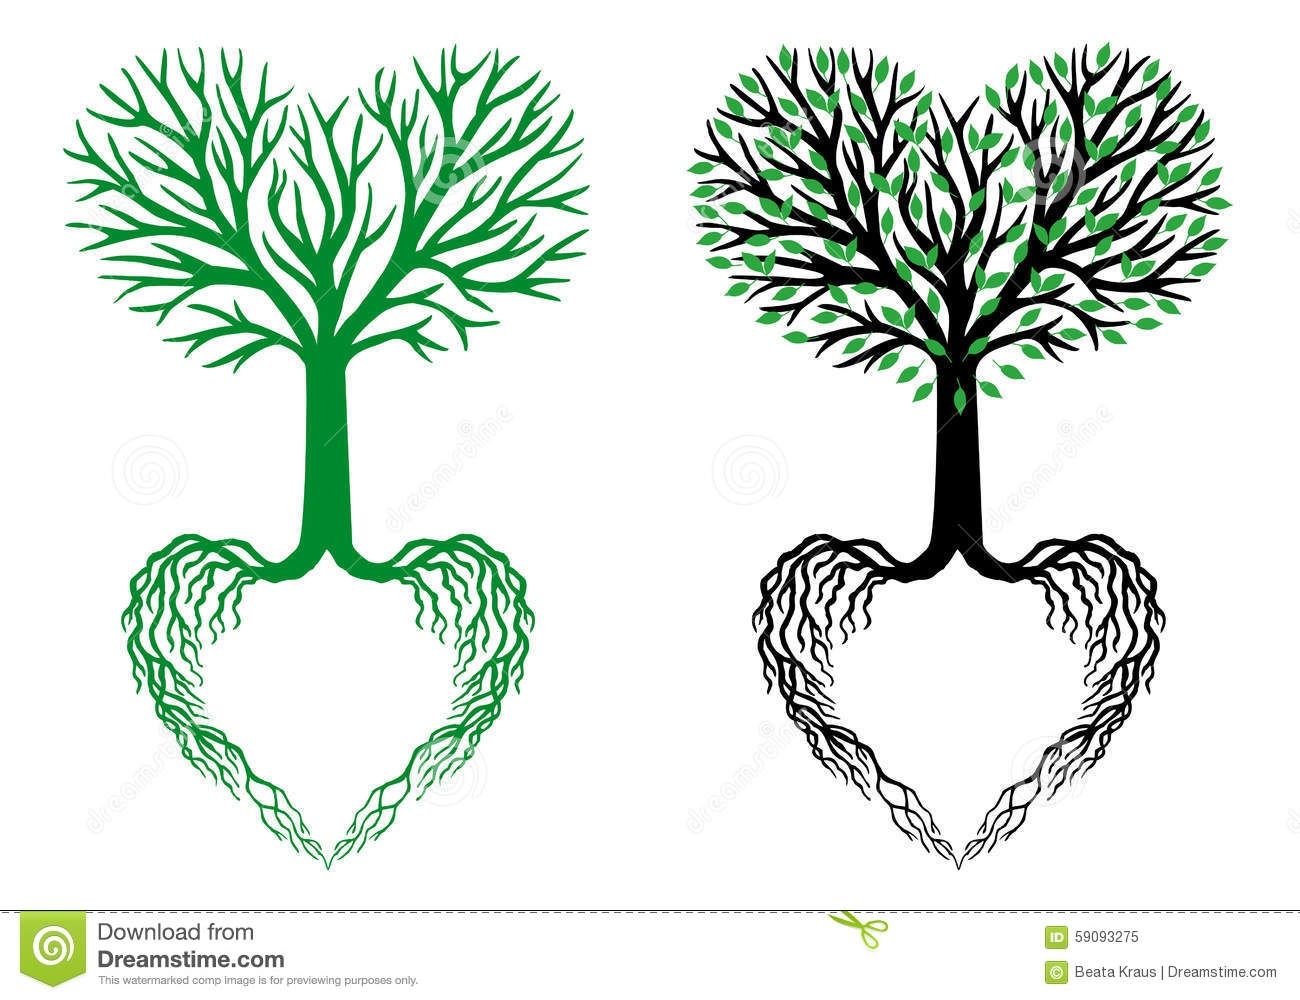 Roots clipart tree.